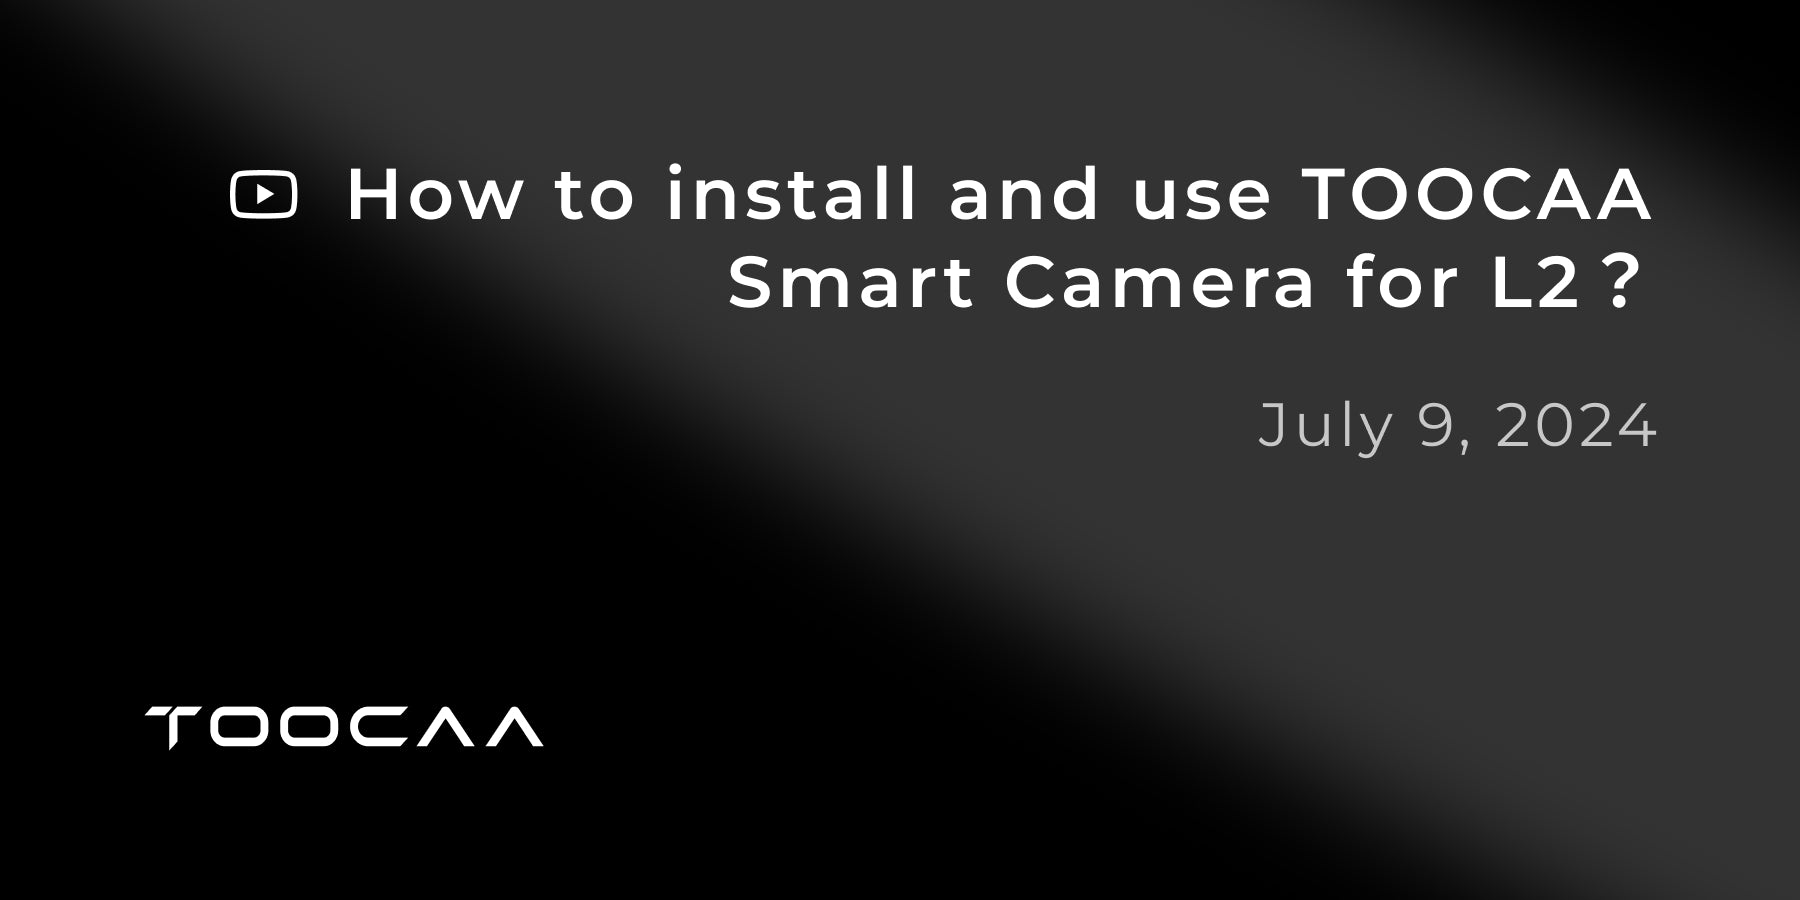 How to install and use TOOCAA Smart Camera for L2？